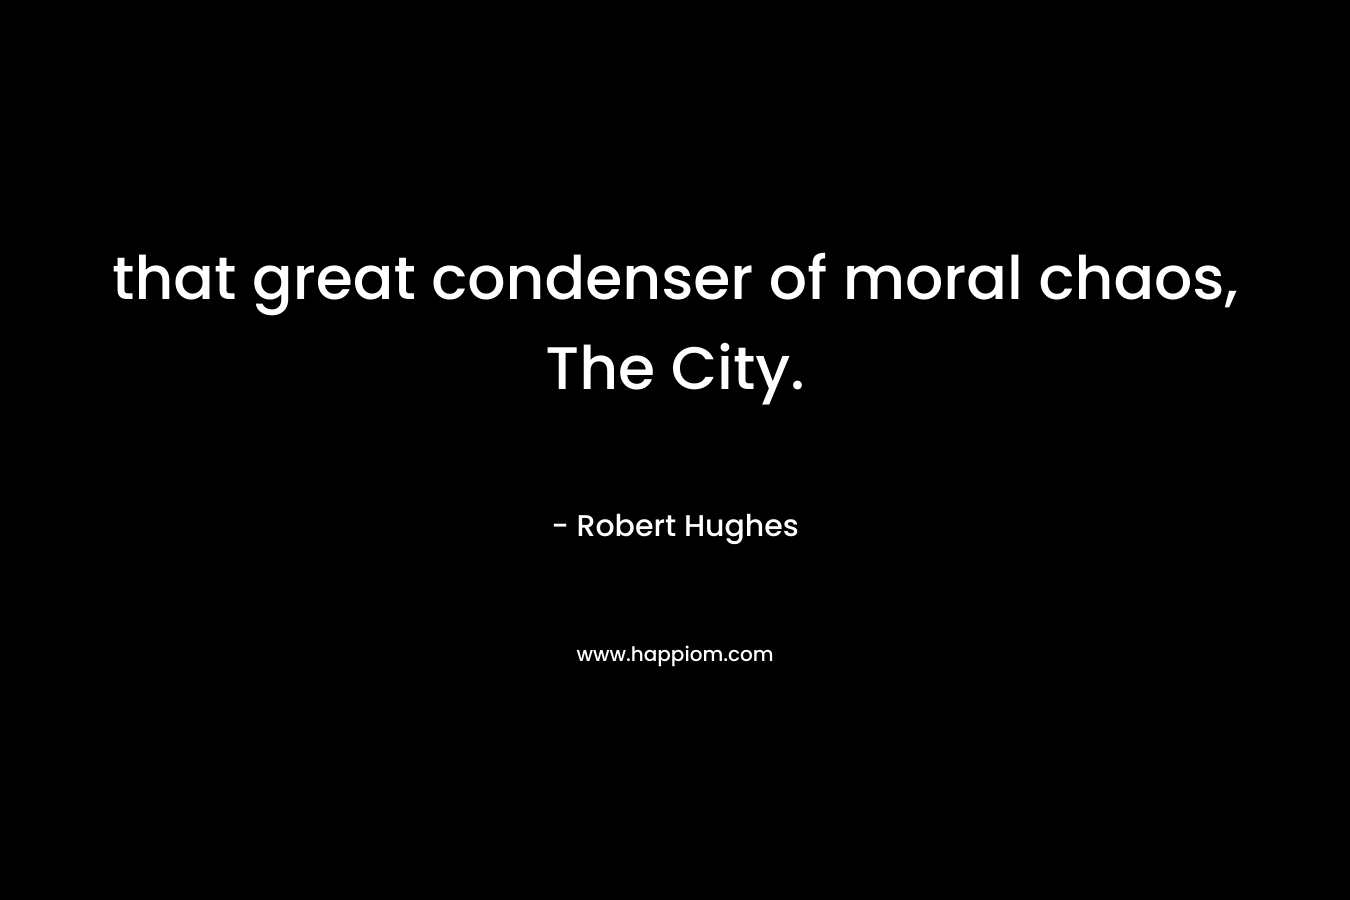 that great condenser of moral chaos, The City.